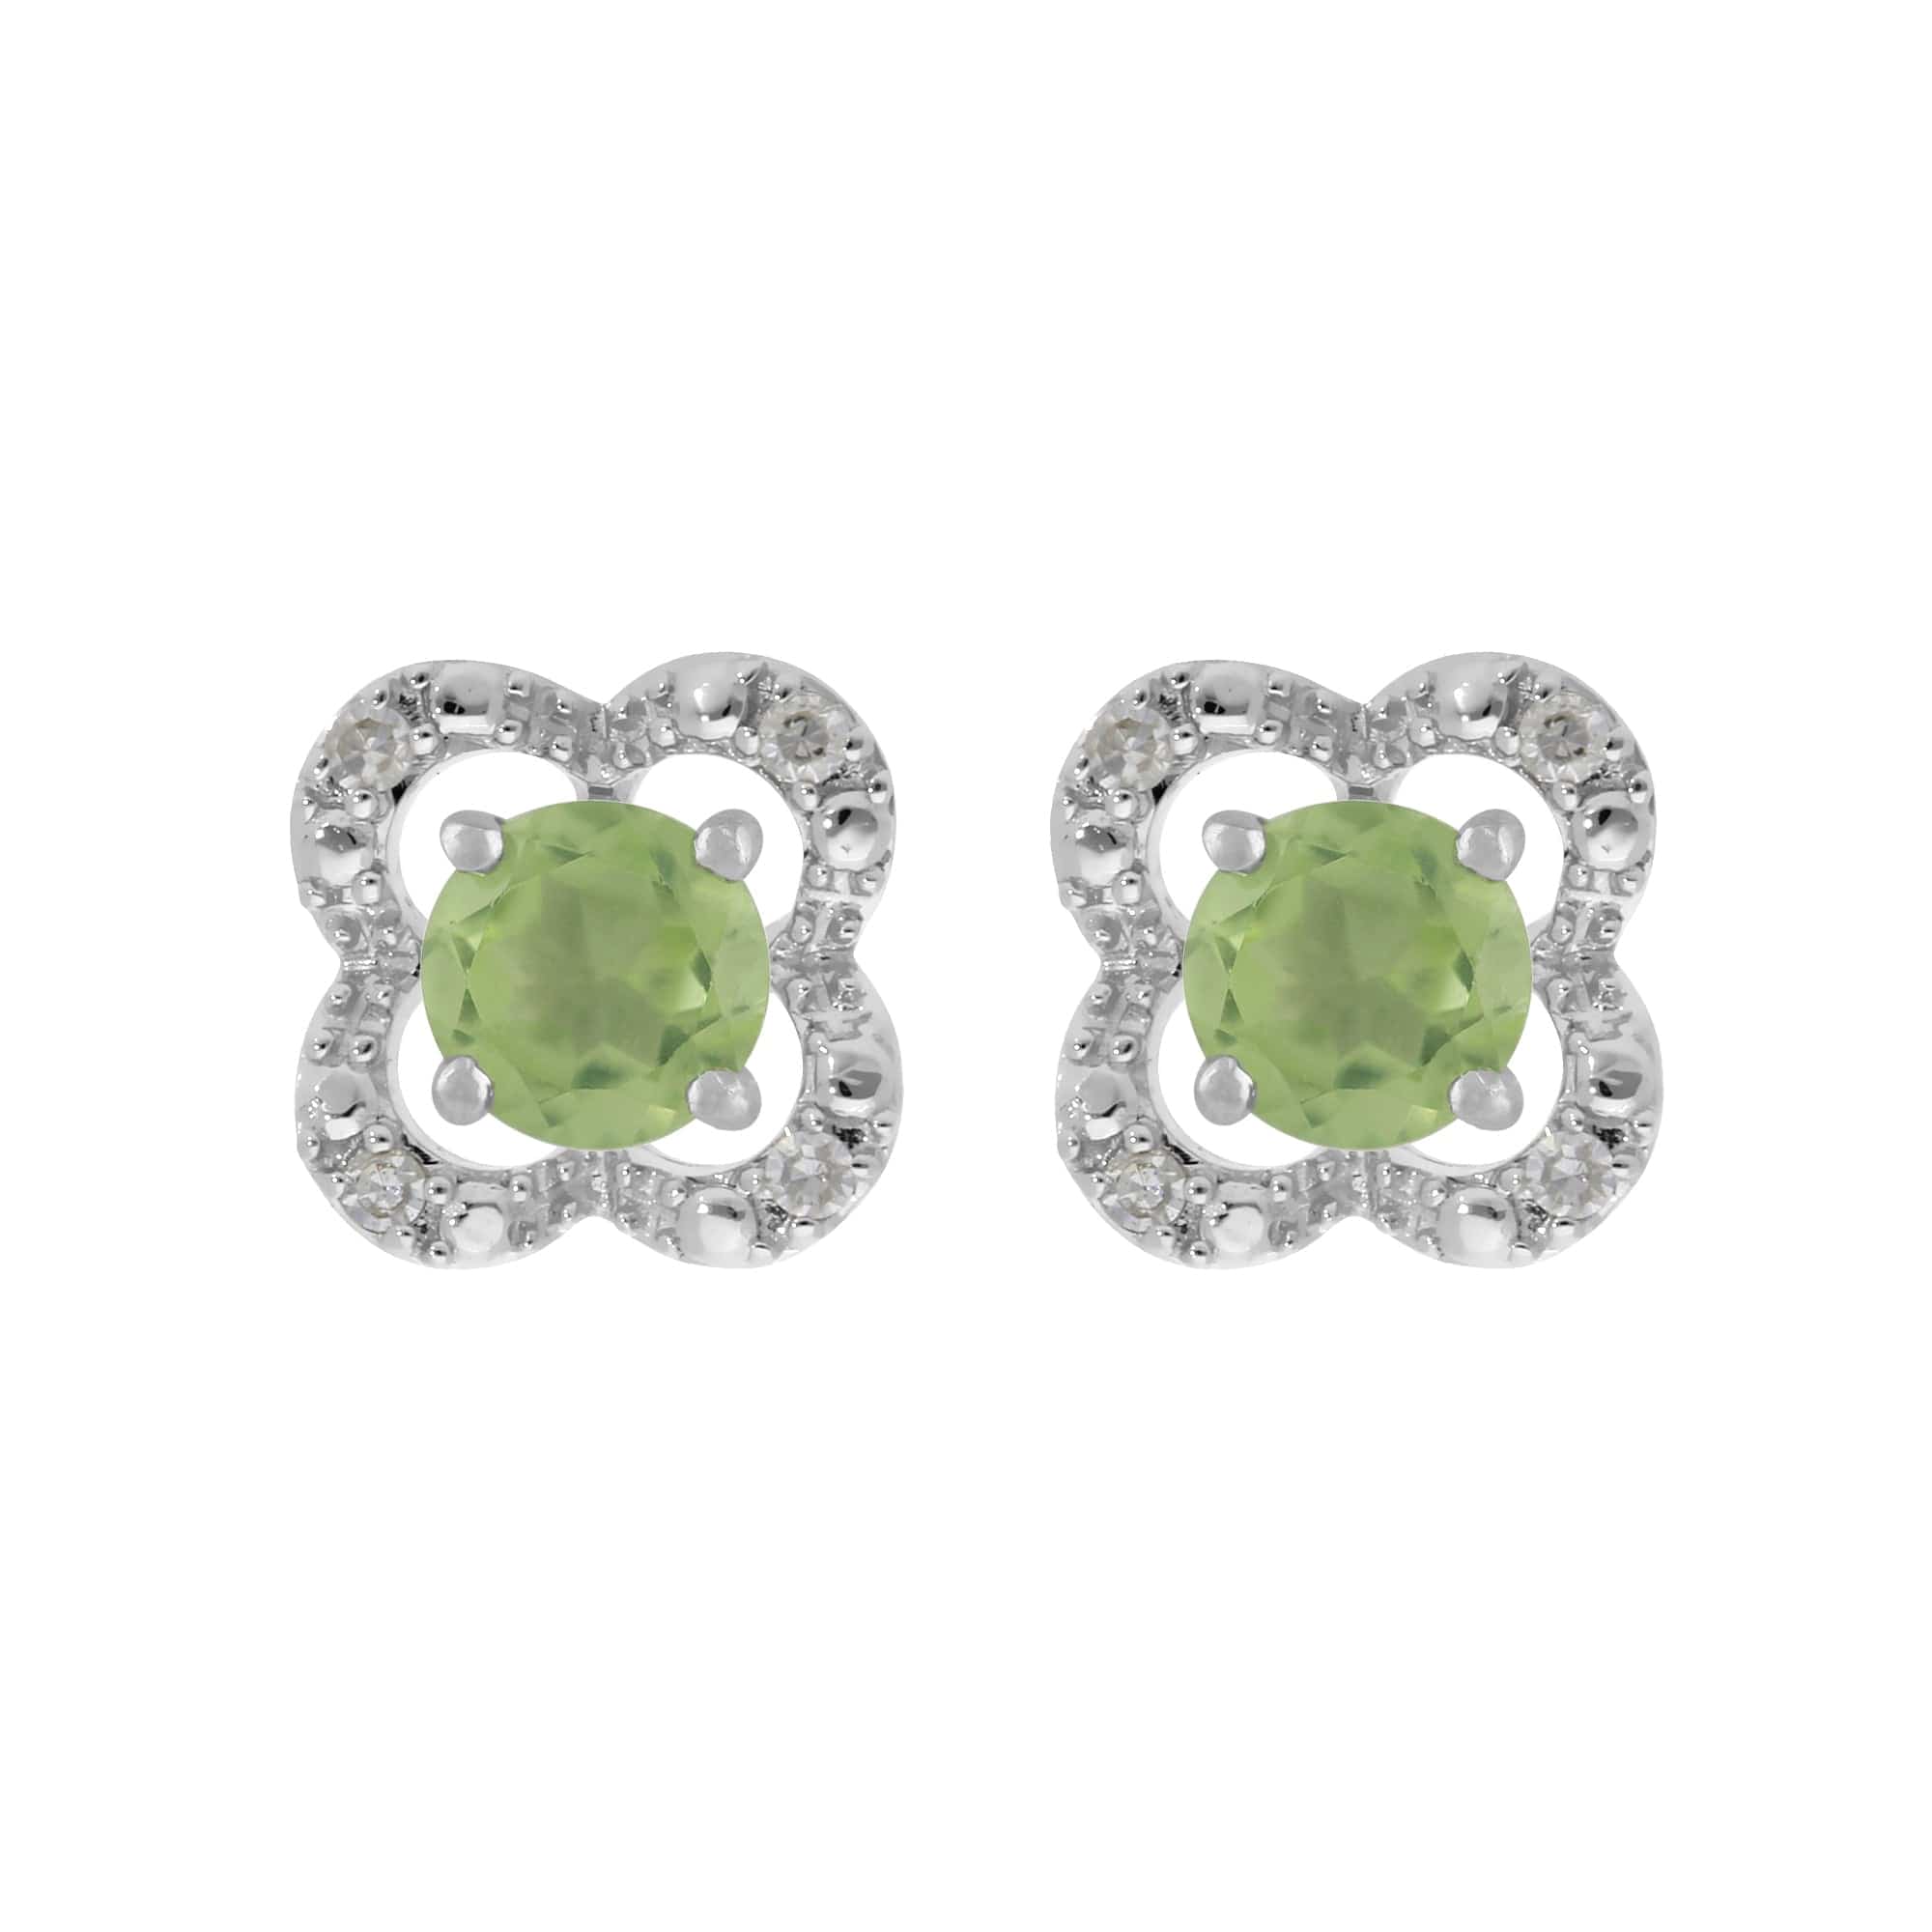 11614-162E0244019 Classic Round Peridot Stud Earrings with Detachable Diamond Flower Ear Jacket in 9ct White Gold 1